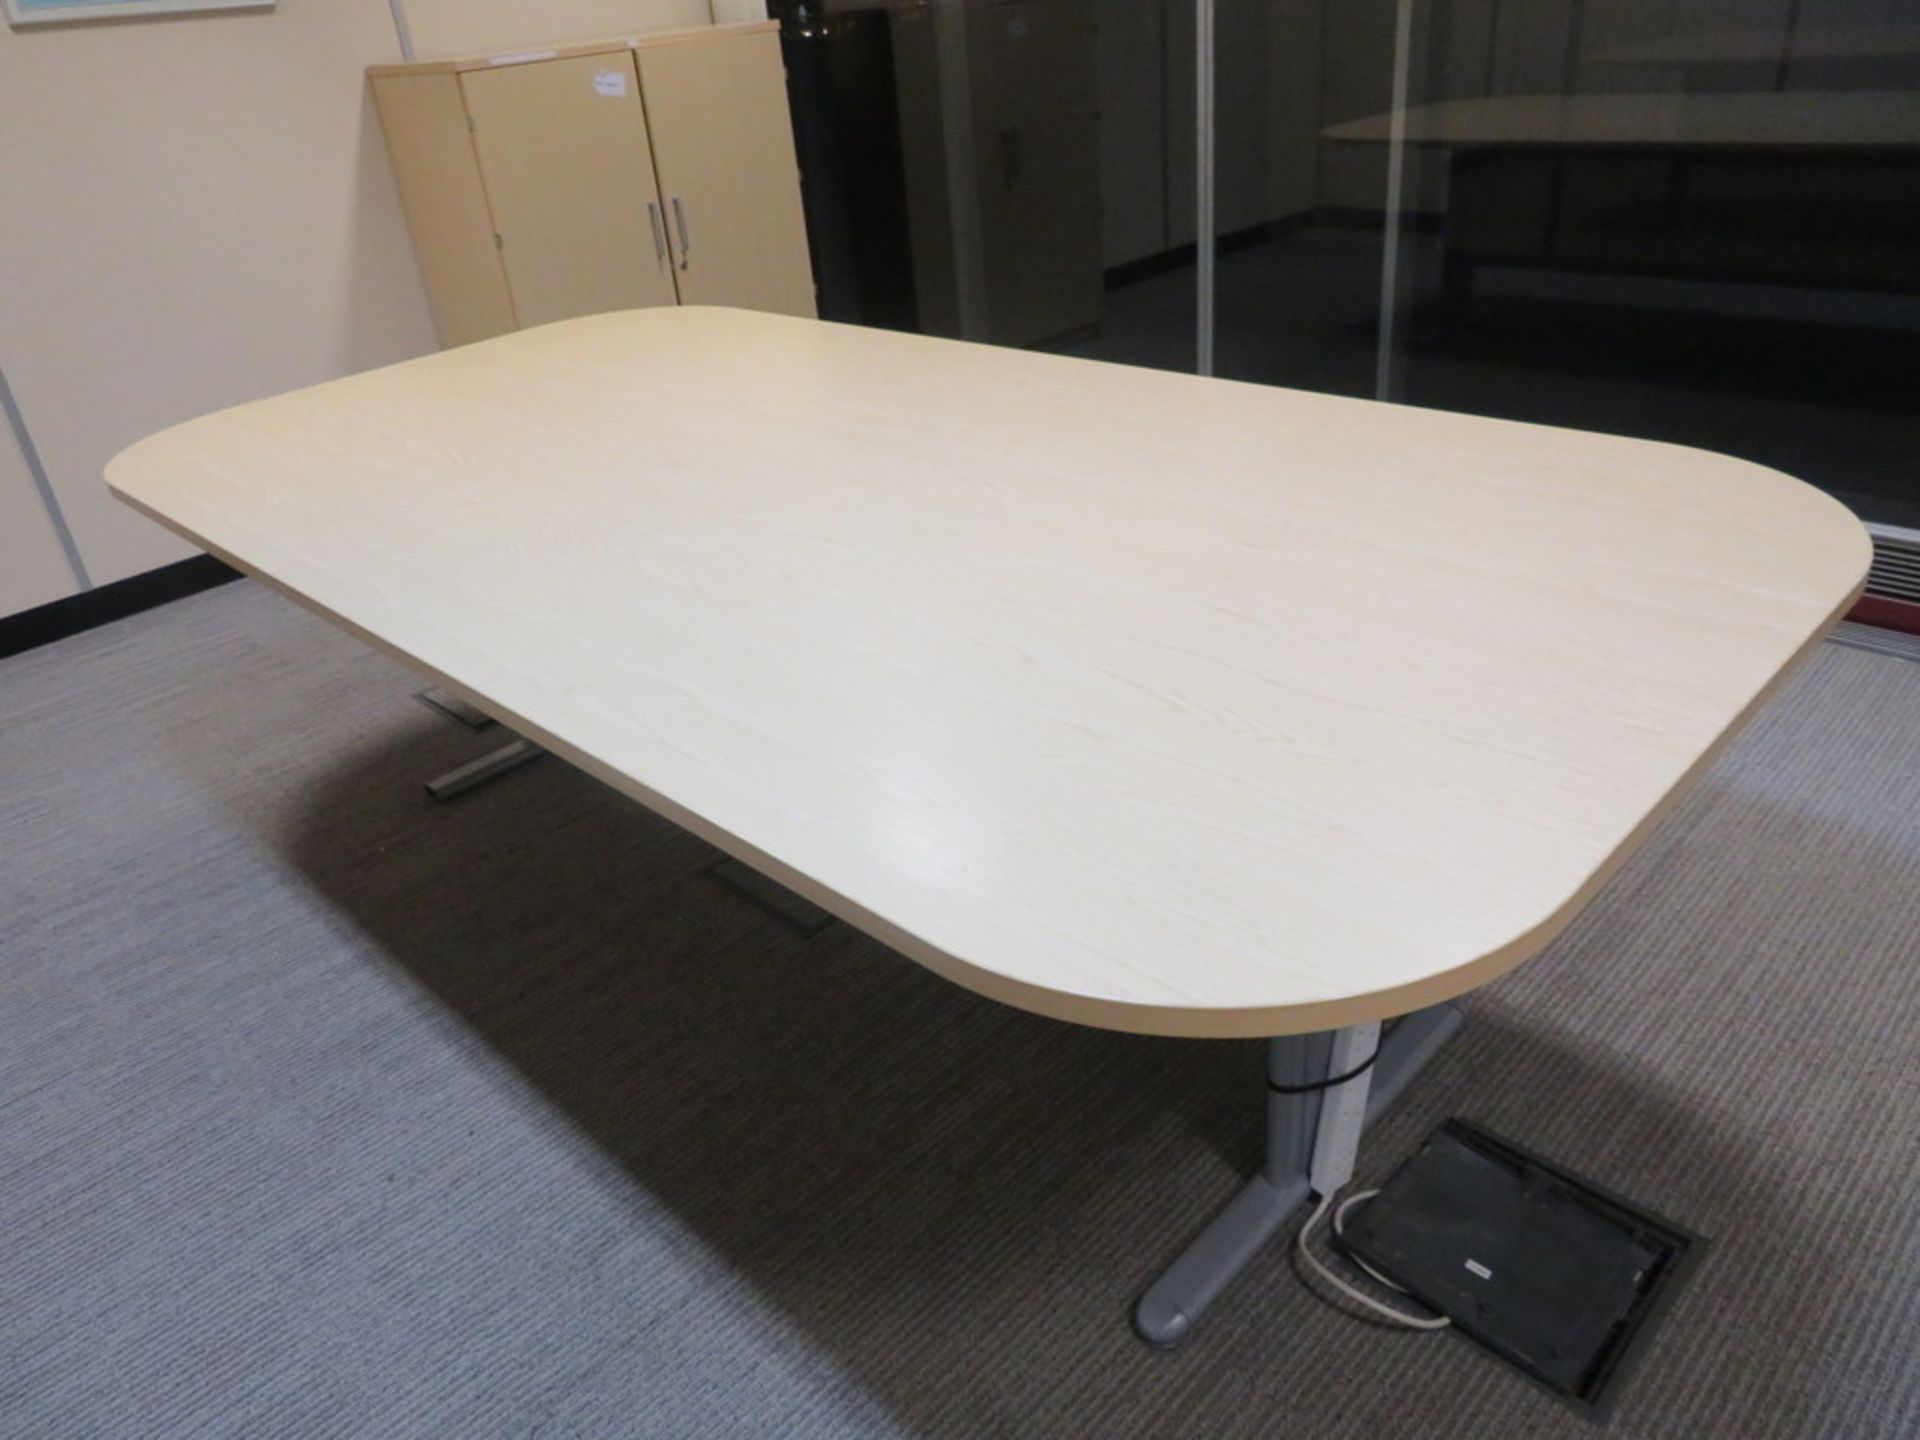 LIGHTWOOD EFFECT BOARDROOM TABLE AND MATCHING TWO DOOR CABINET - Image 2 of 3